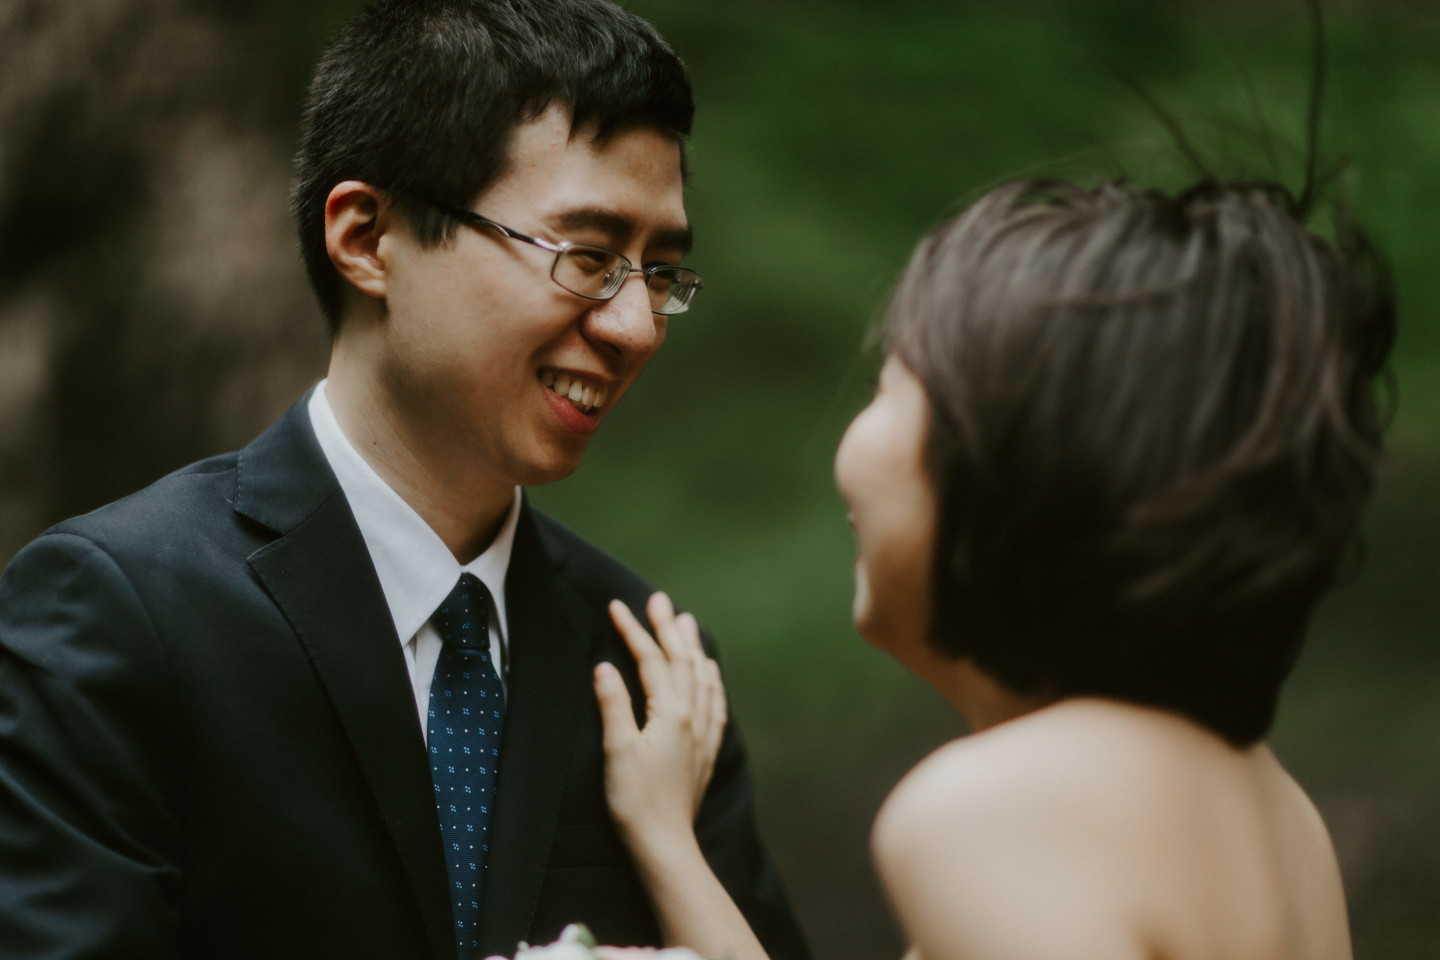 Alex smiles at Valerie. Elopement wedding photography at Mount Hood by Sienna Plus Josh.